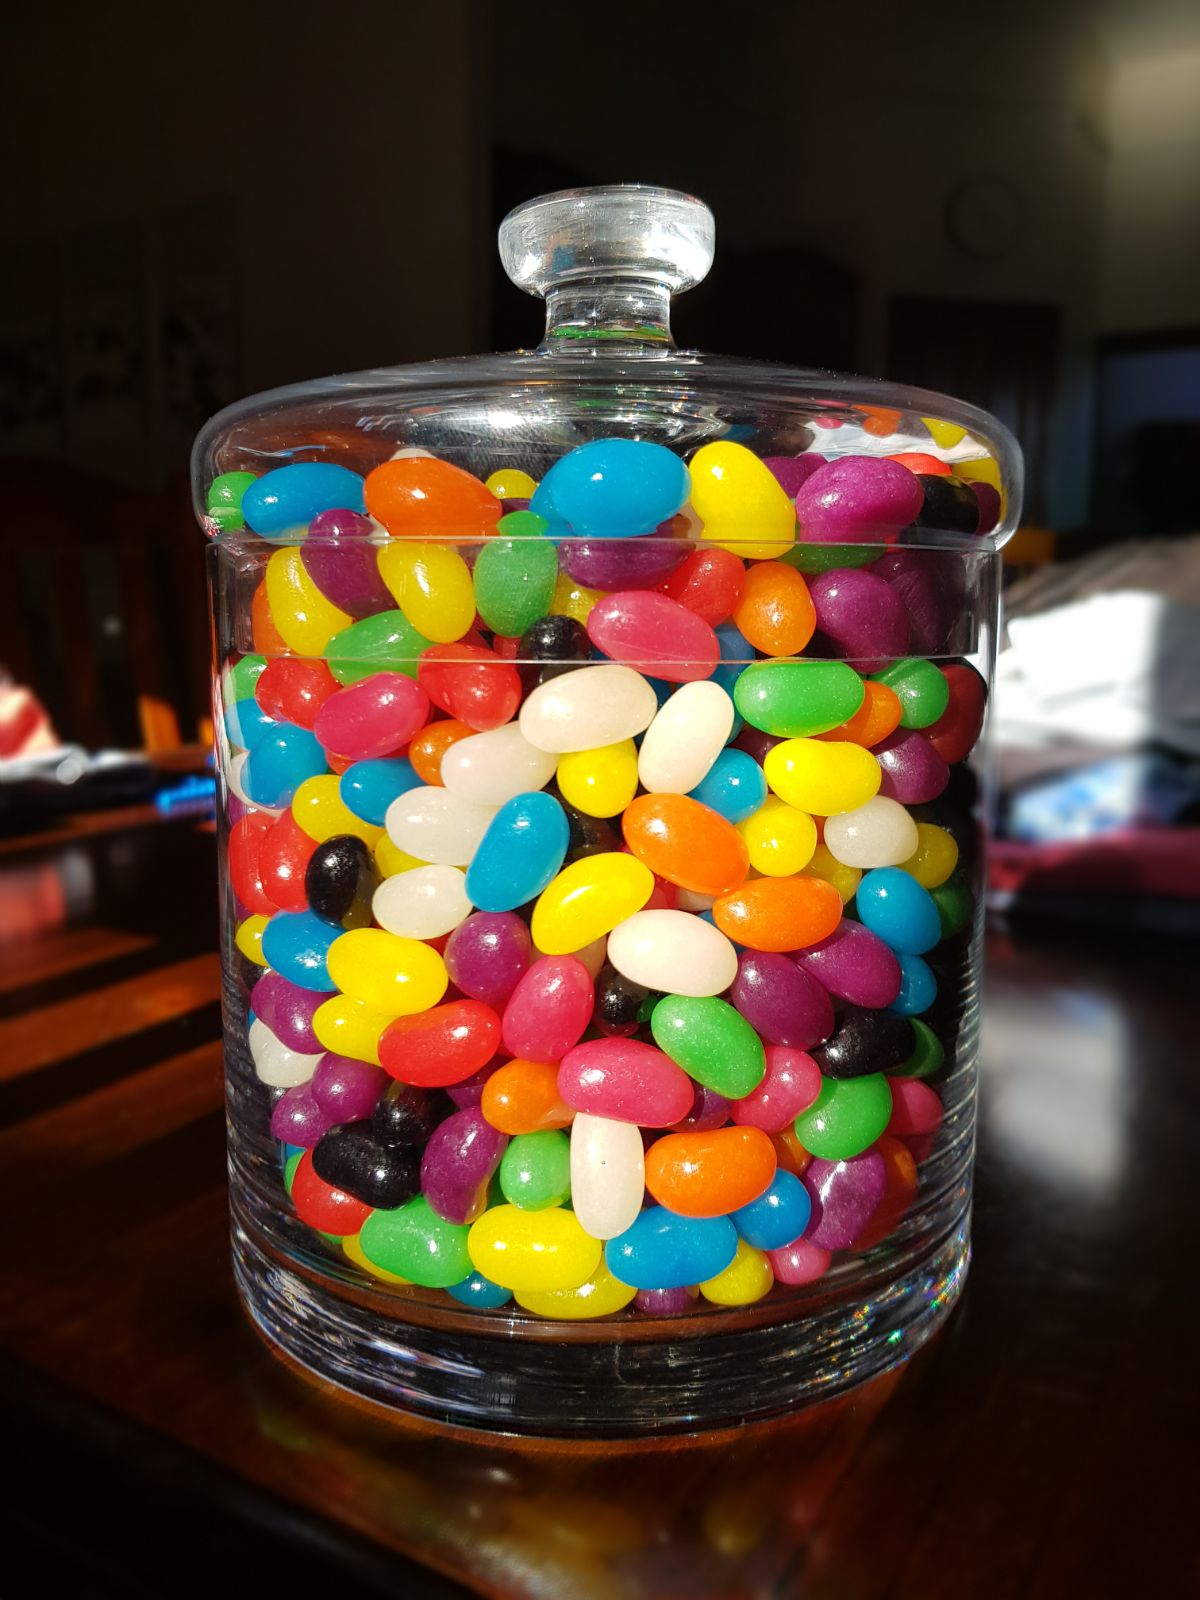 last-chance-to-guess-how-many-jelly-beans-are-in-the-jar-steemit